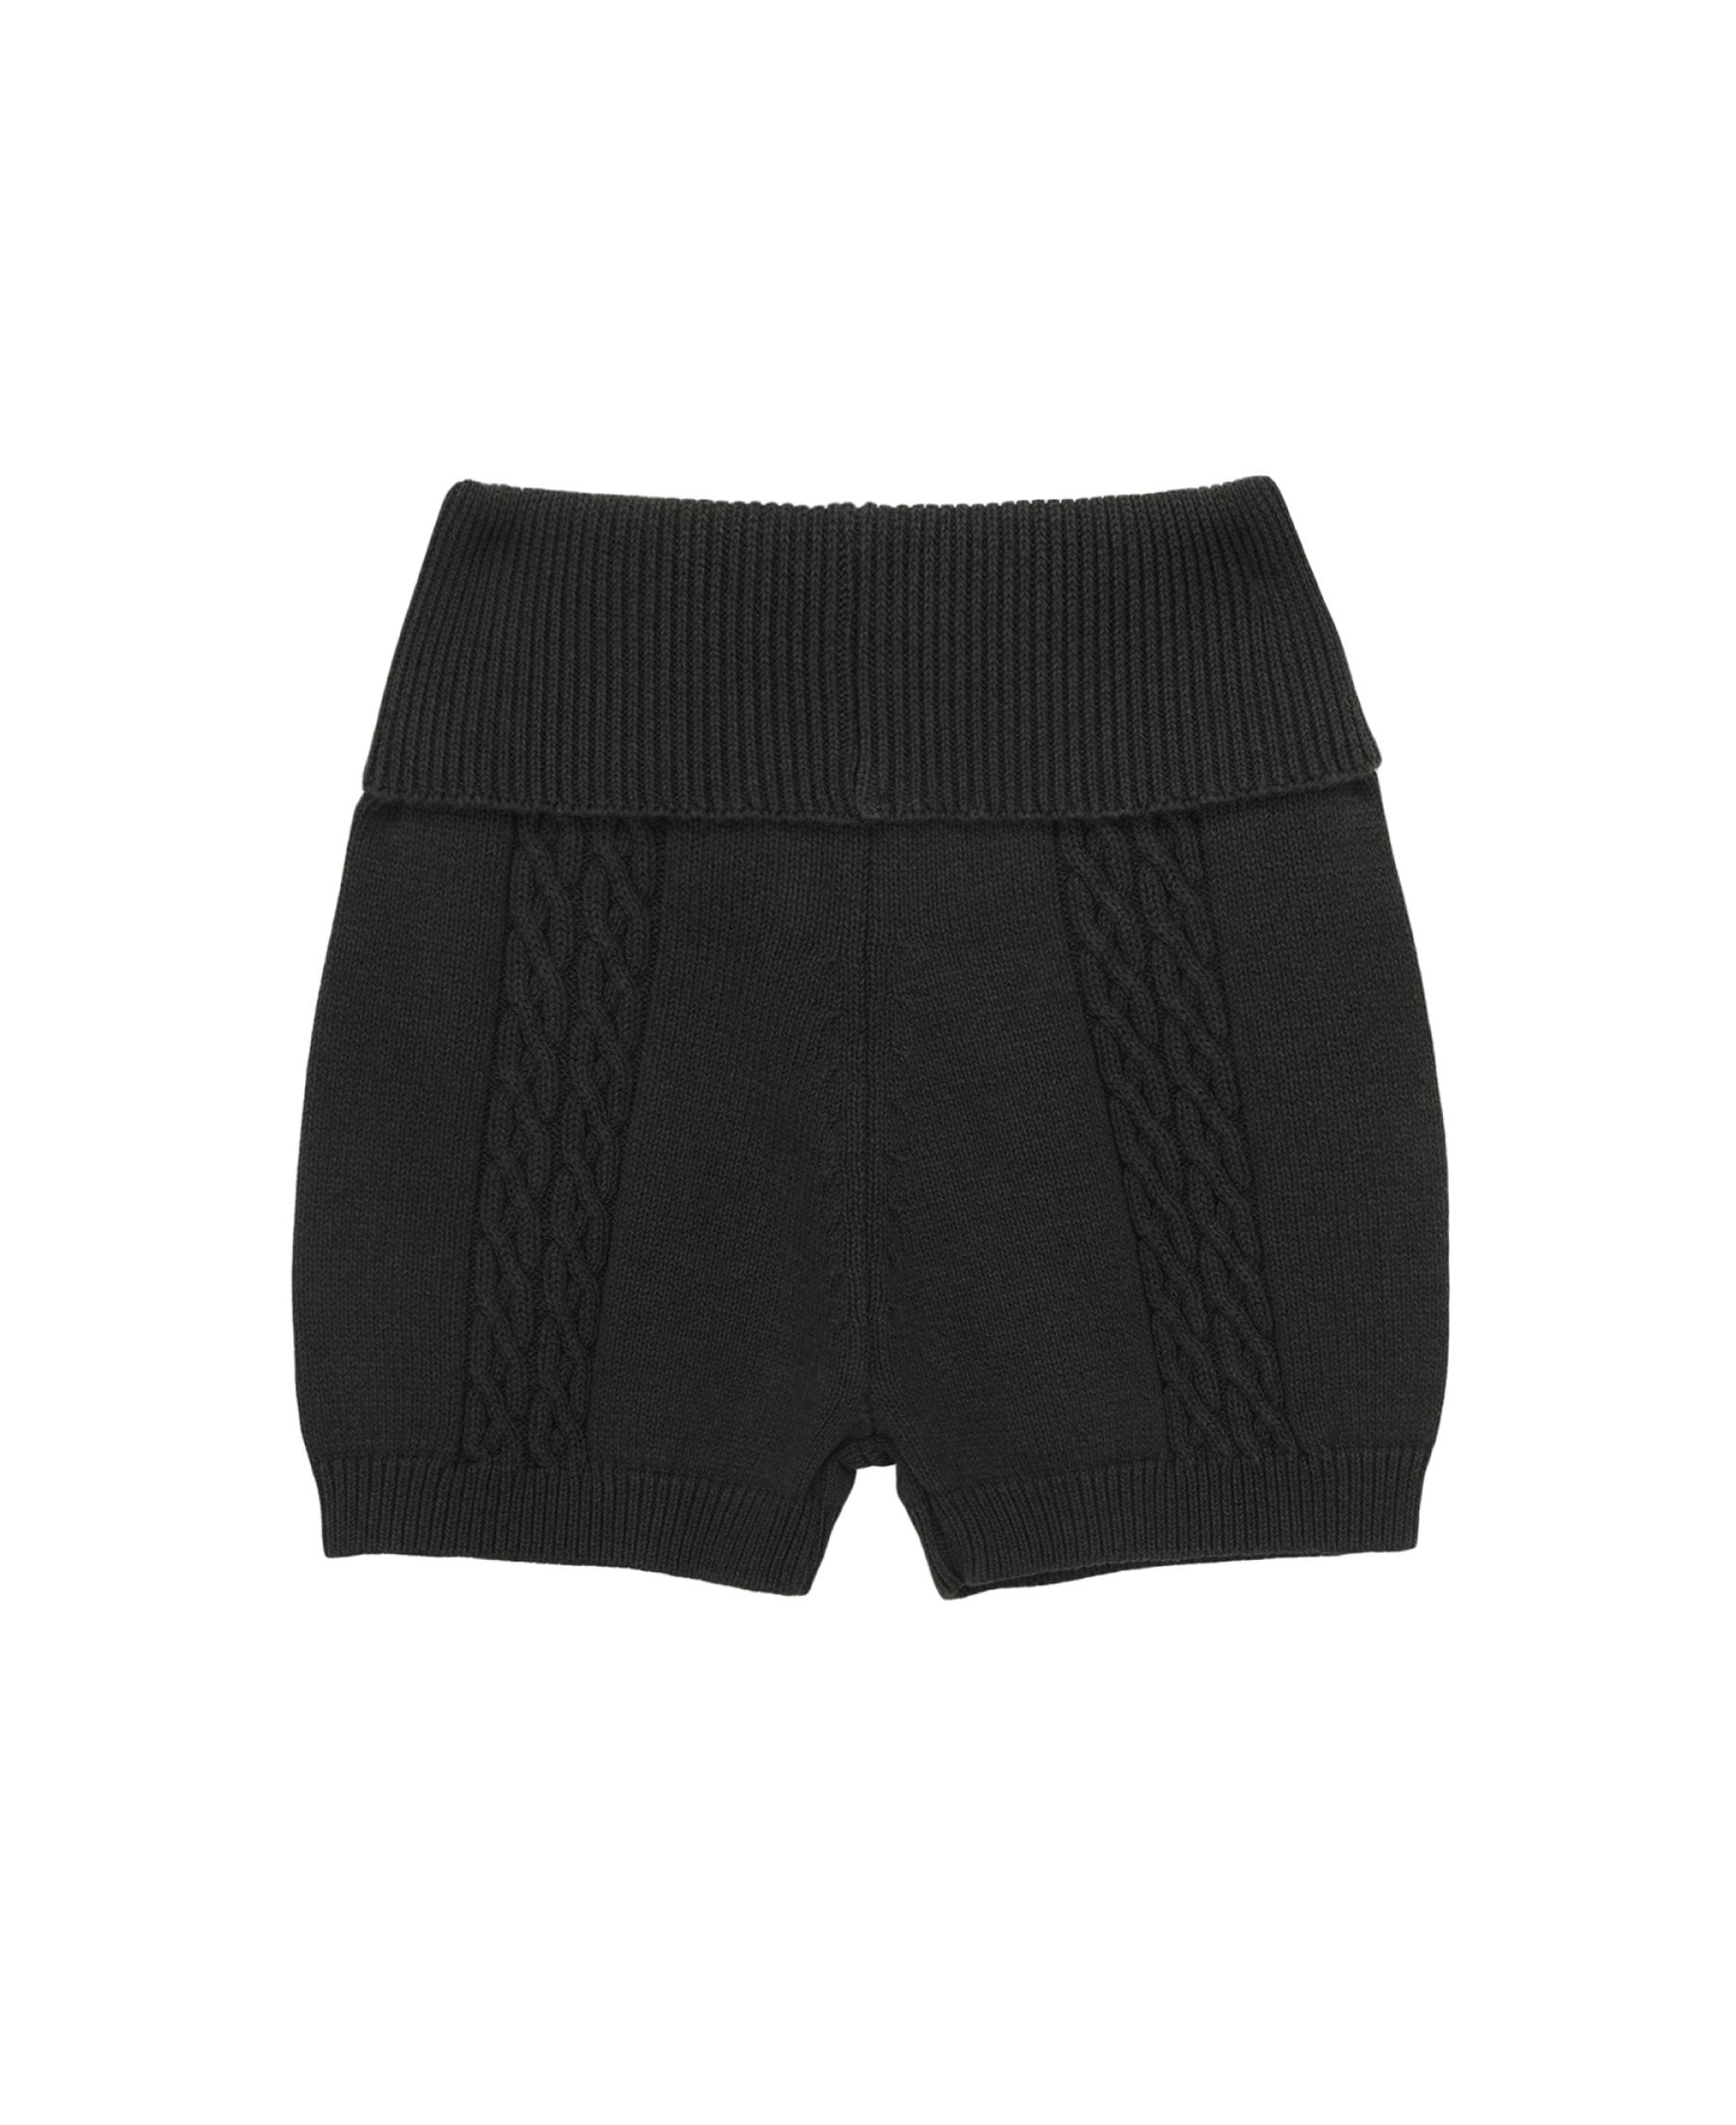 Cable knitted shorts (charcoal)